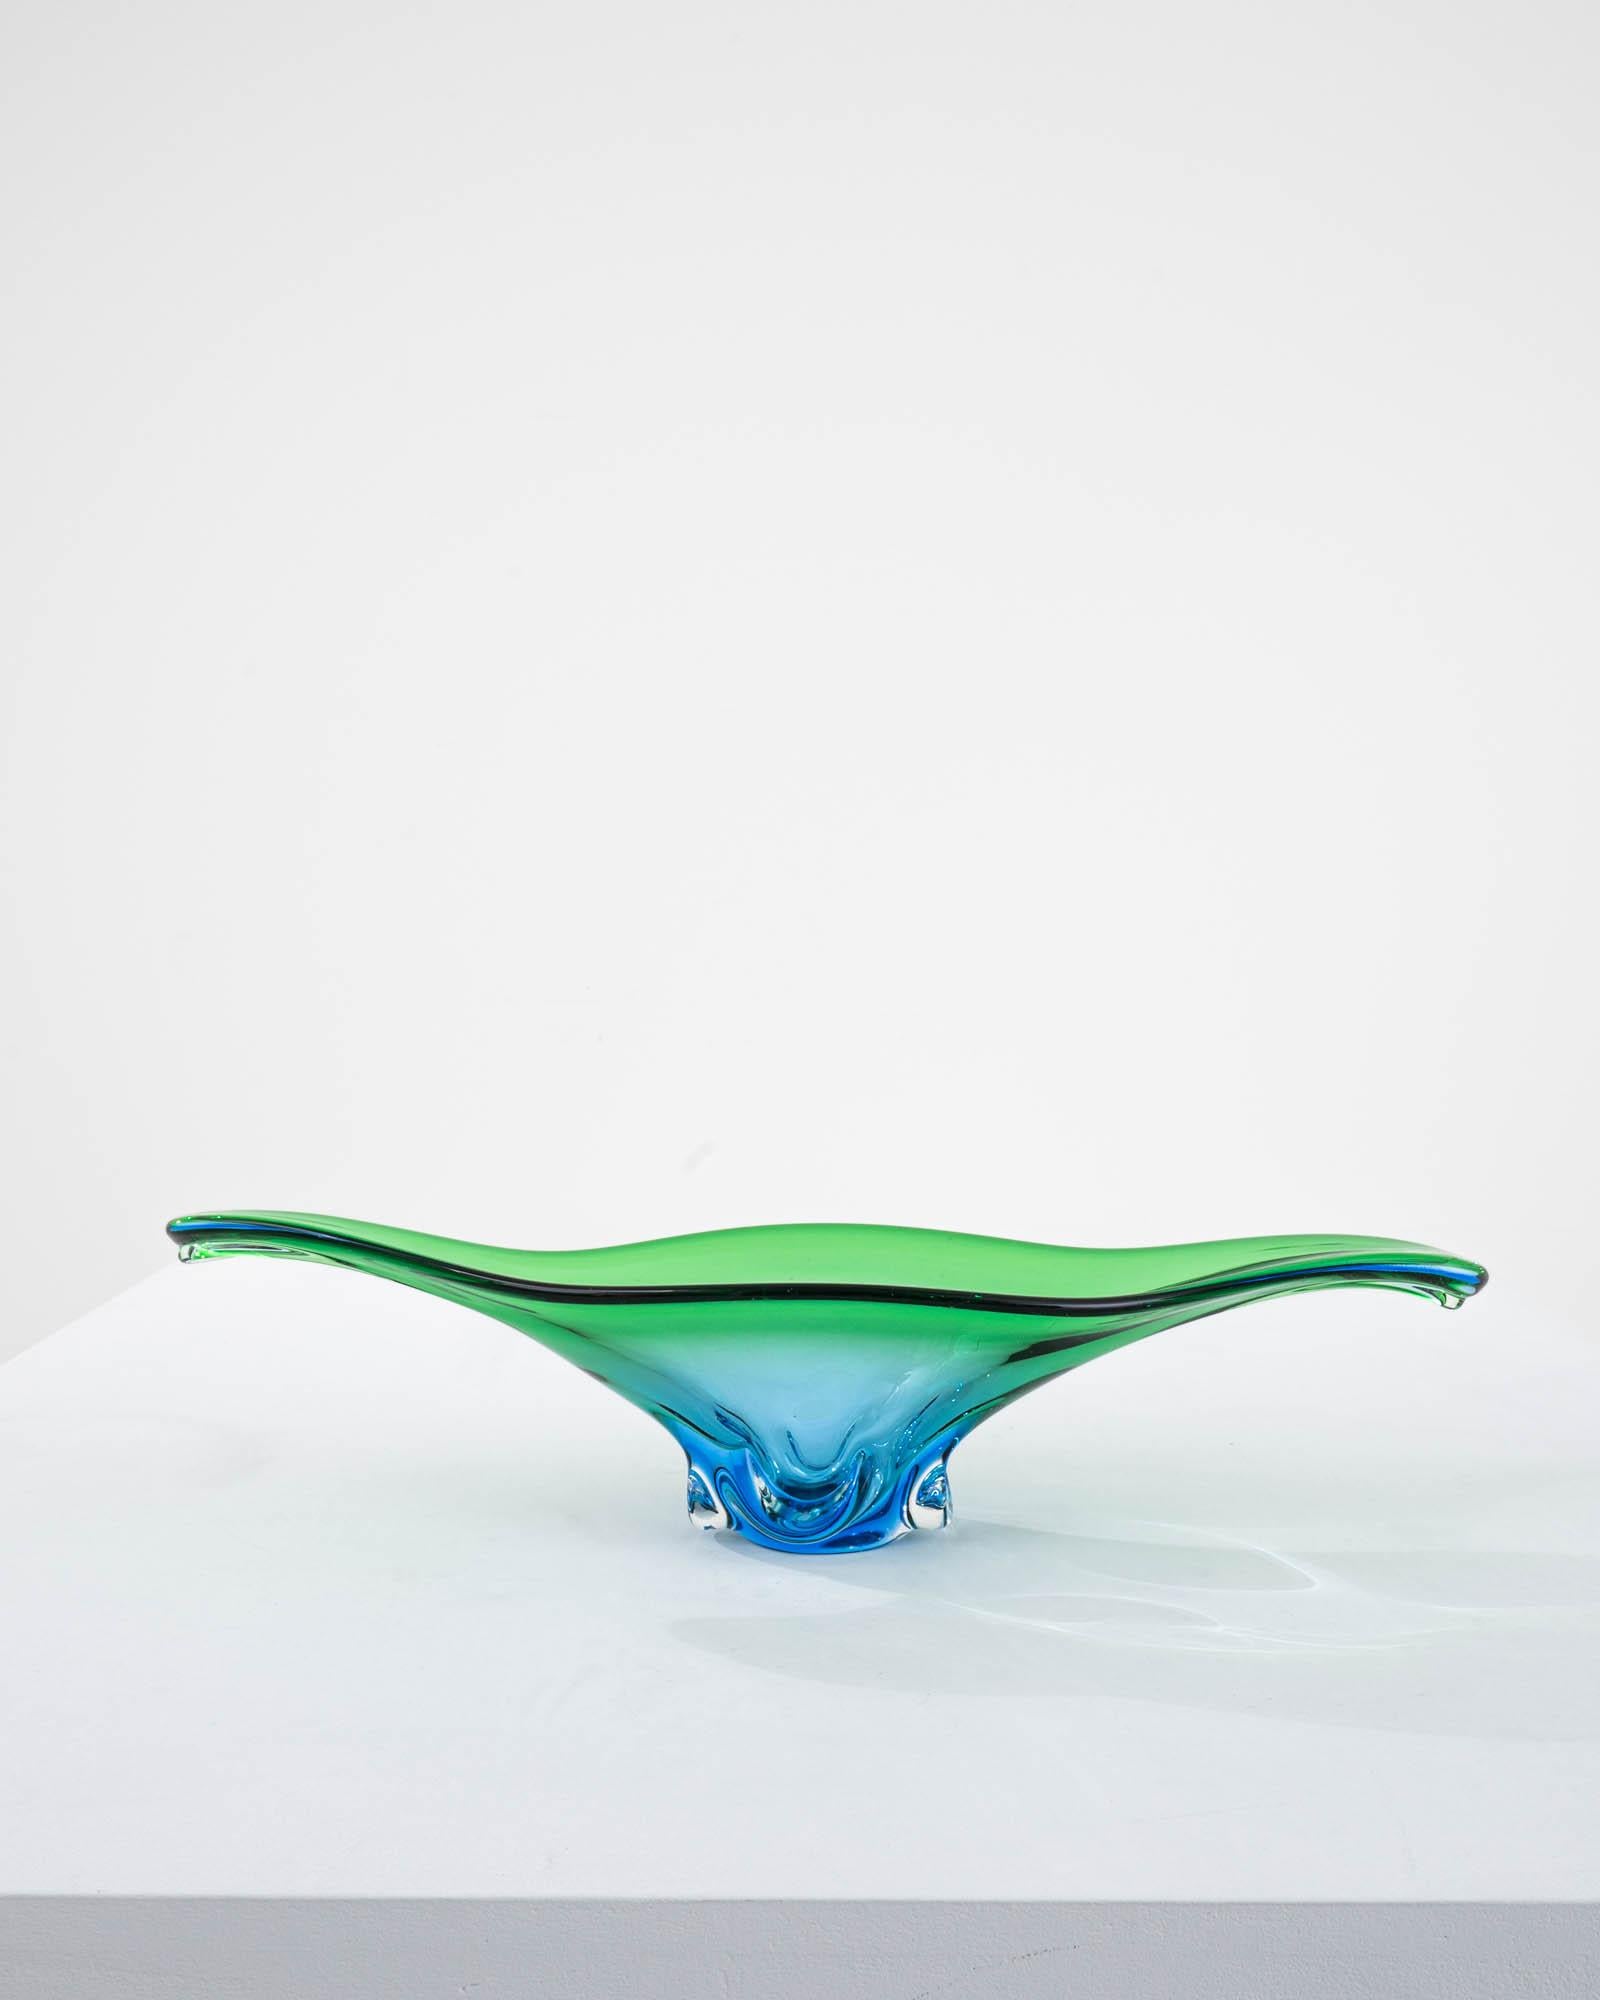 The vivid hues and liquid lines of blown art glass create an unmissable accent. Made in Italy circa 1960, expressive glasswork forms a bold silhouette. Organic and abstract, reminiscent of a water droplet captured in slow motion. A luminous gradient